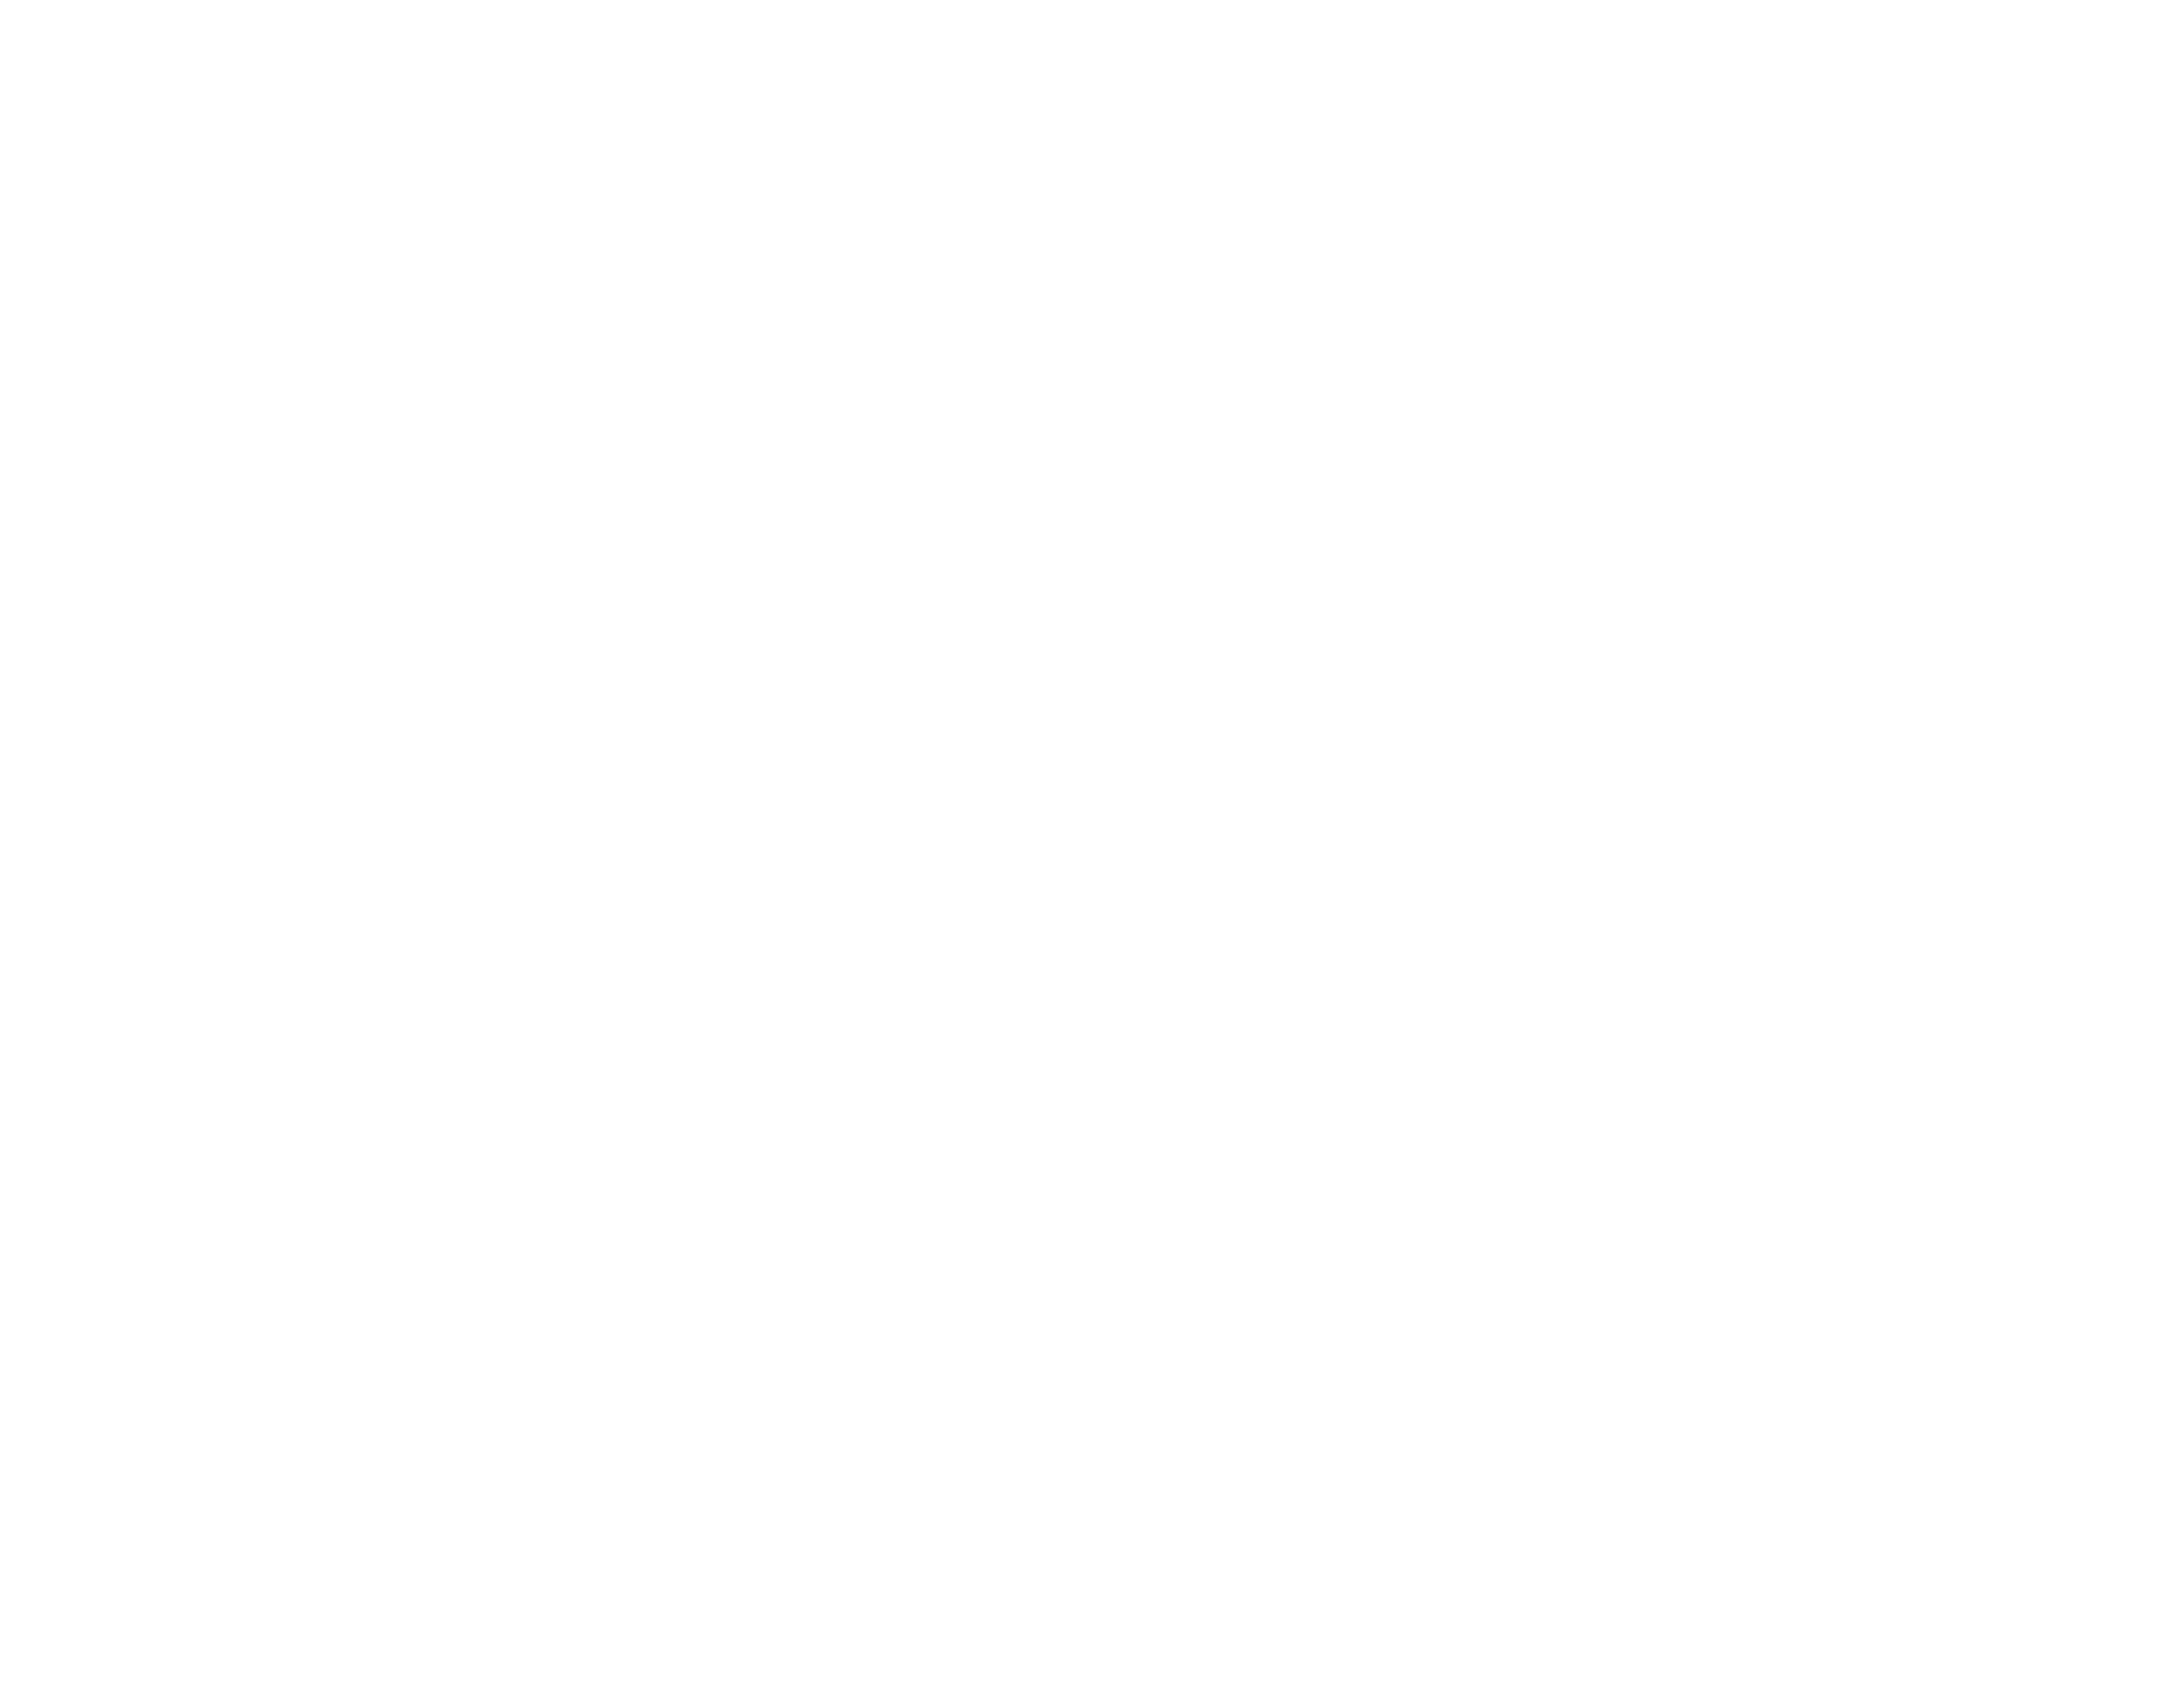 Outlet Price | Factory Outlet Online | Clearance Sale | Online Shopping website | Big Sale